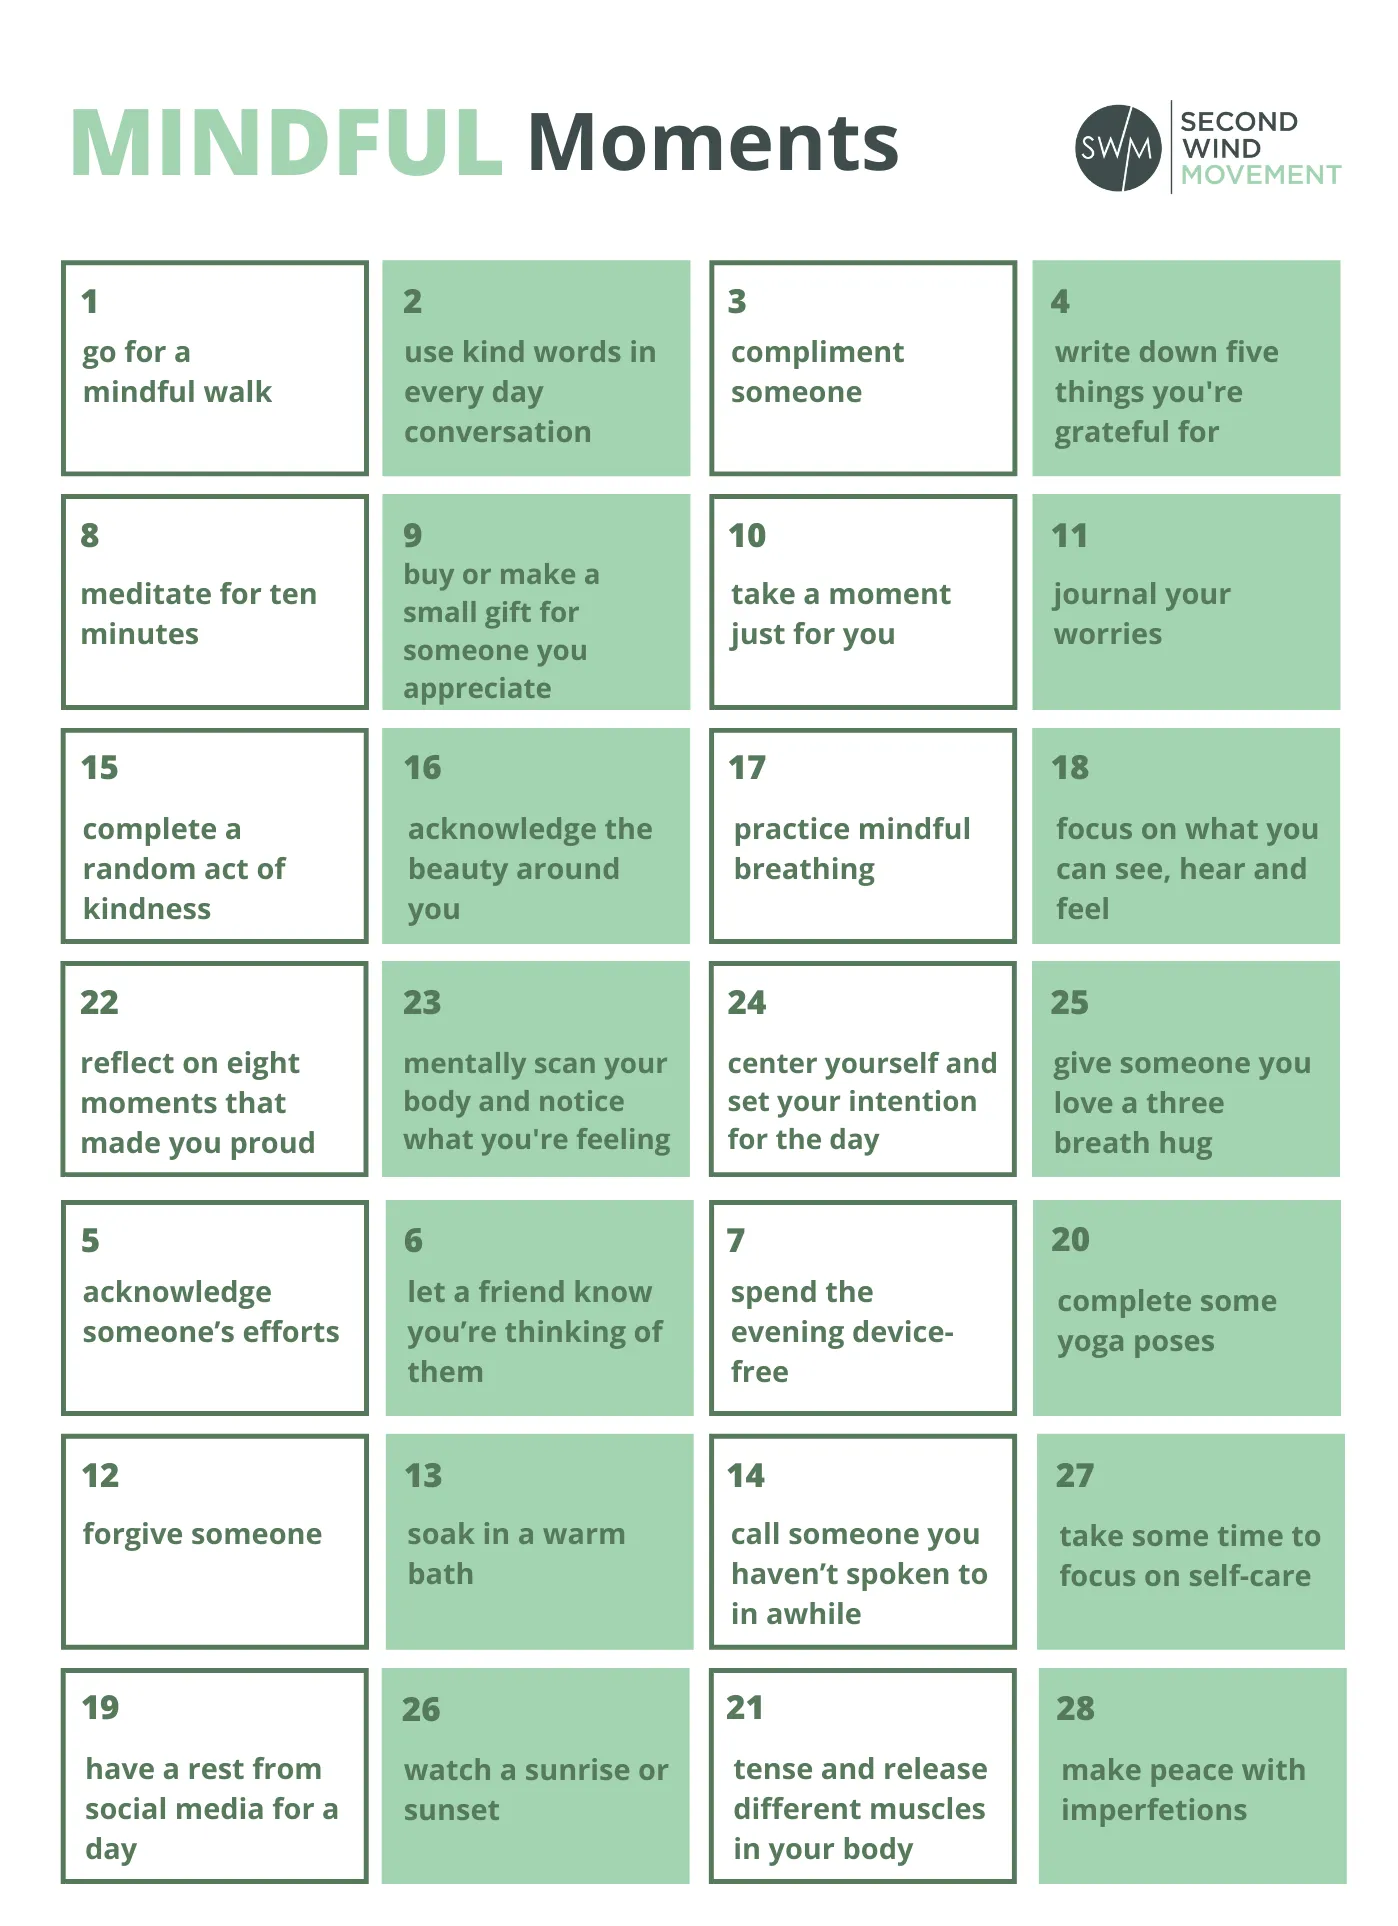 28 days of mindful moments and mindfulness calendar